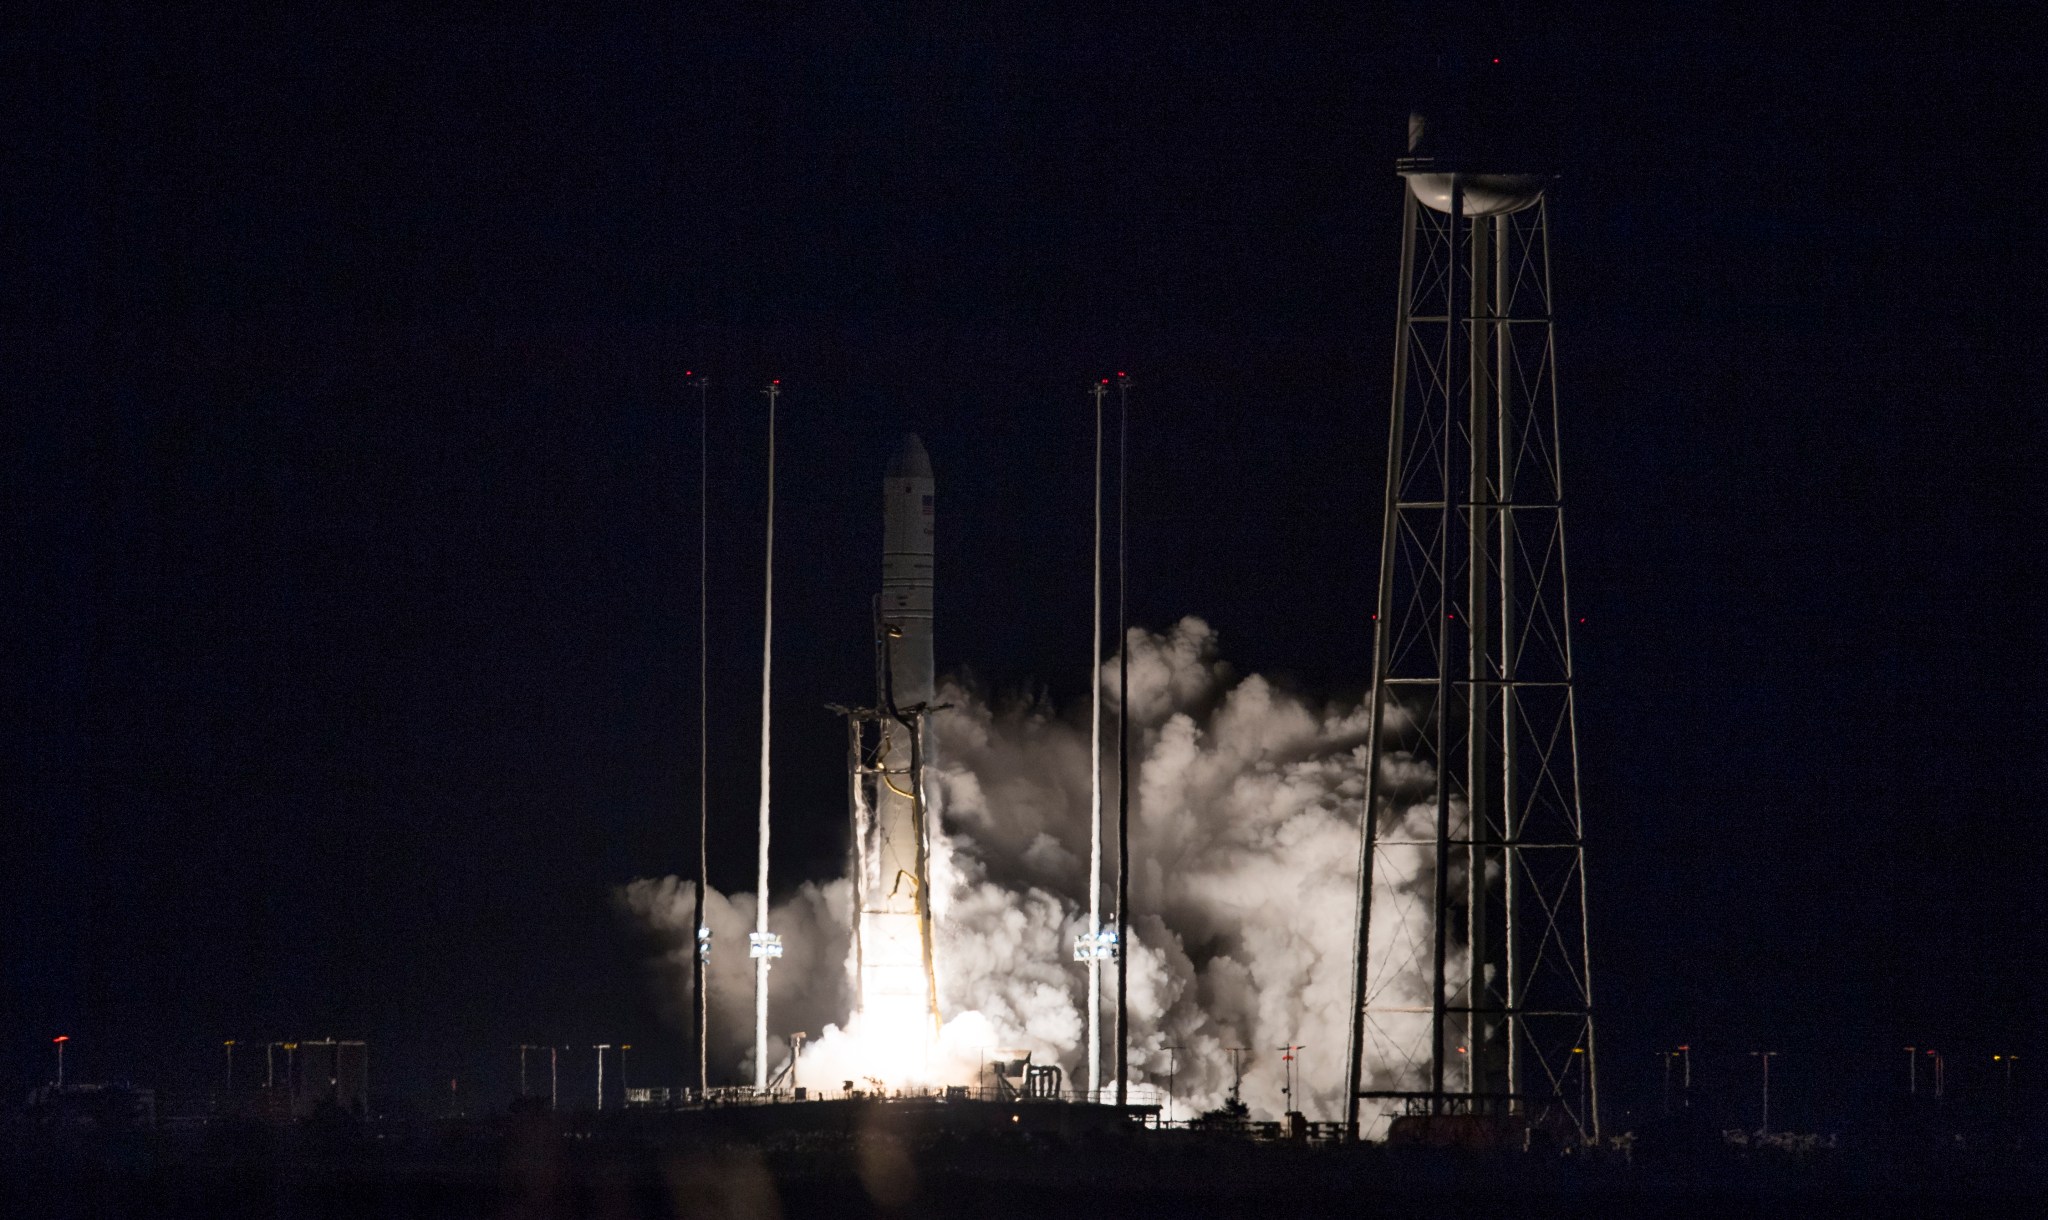 The Northrop Grumman Antares rocket, with Cygnus resupply spacecraft onboard, launches from Pad-0A, Saturday, Nov. 17, 2018.